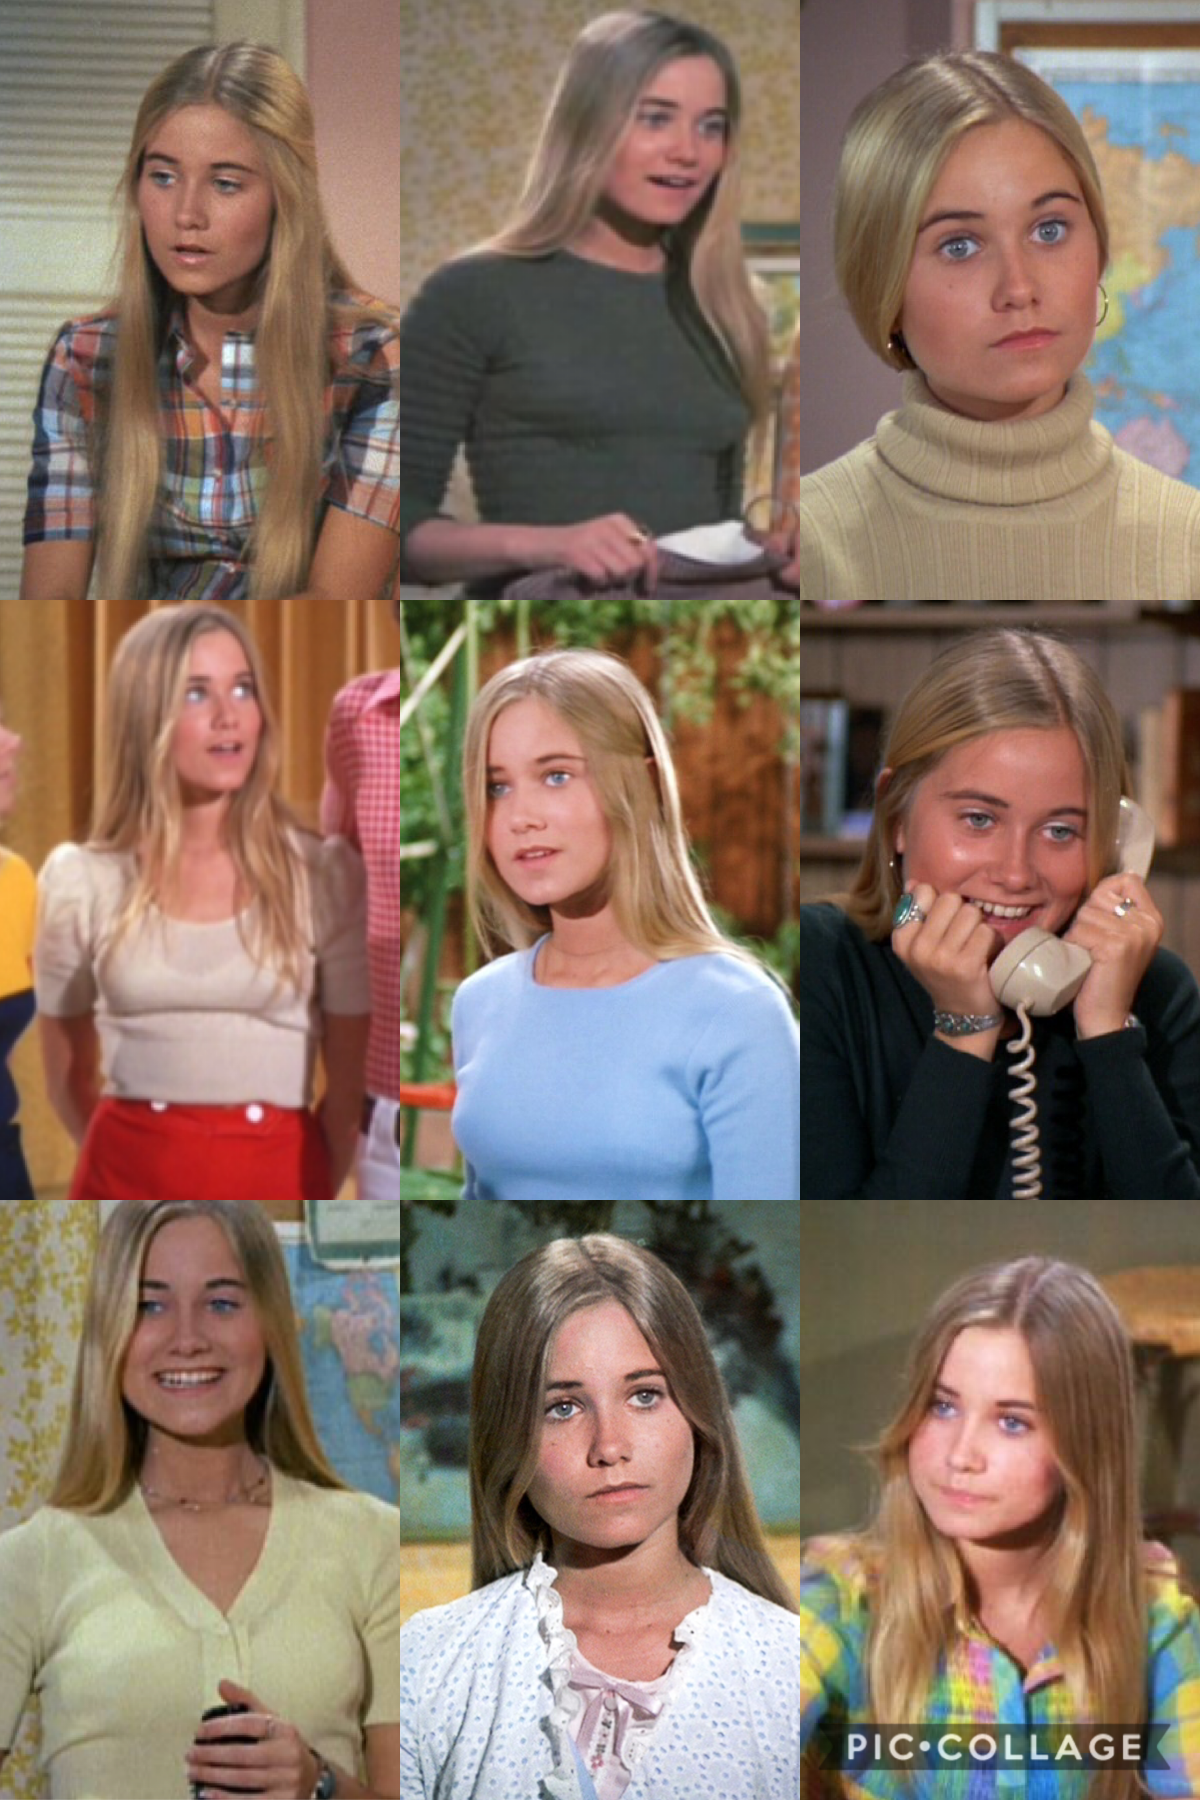 Marcia from the Brady bunch owns my heart you heart it here first folks 💕
i watched this show every day after school in the fifth grade 😭